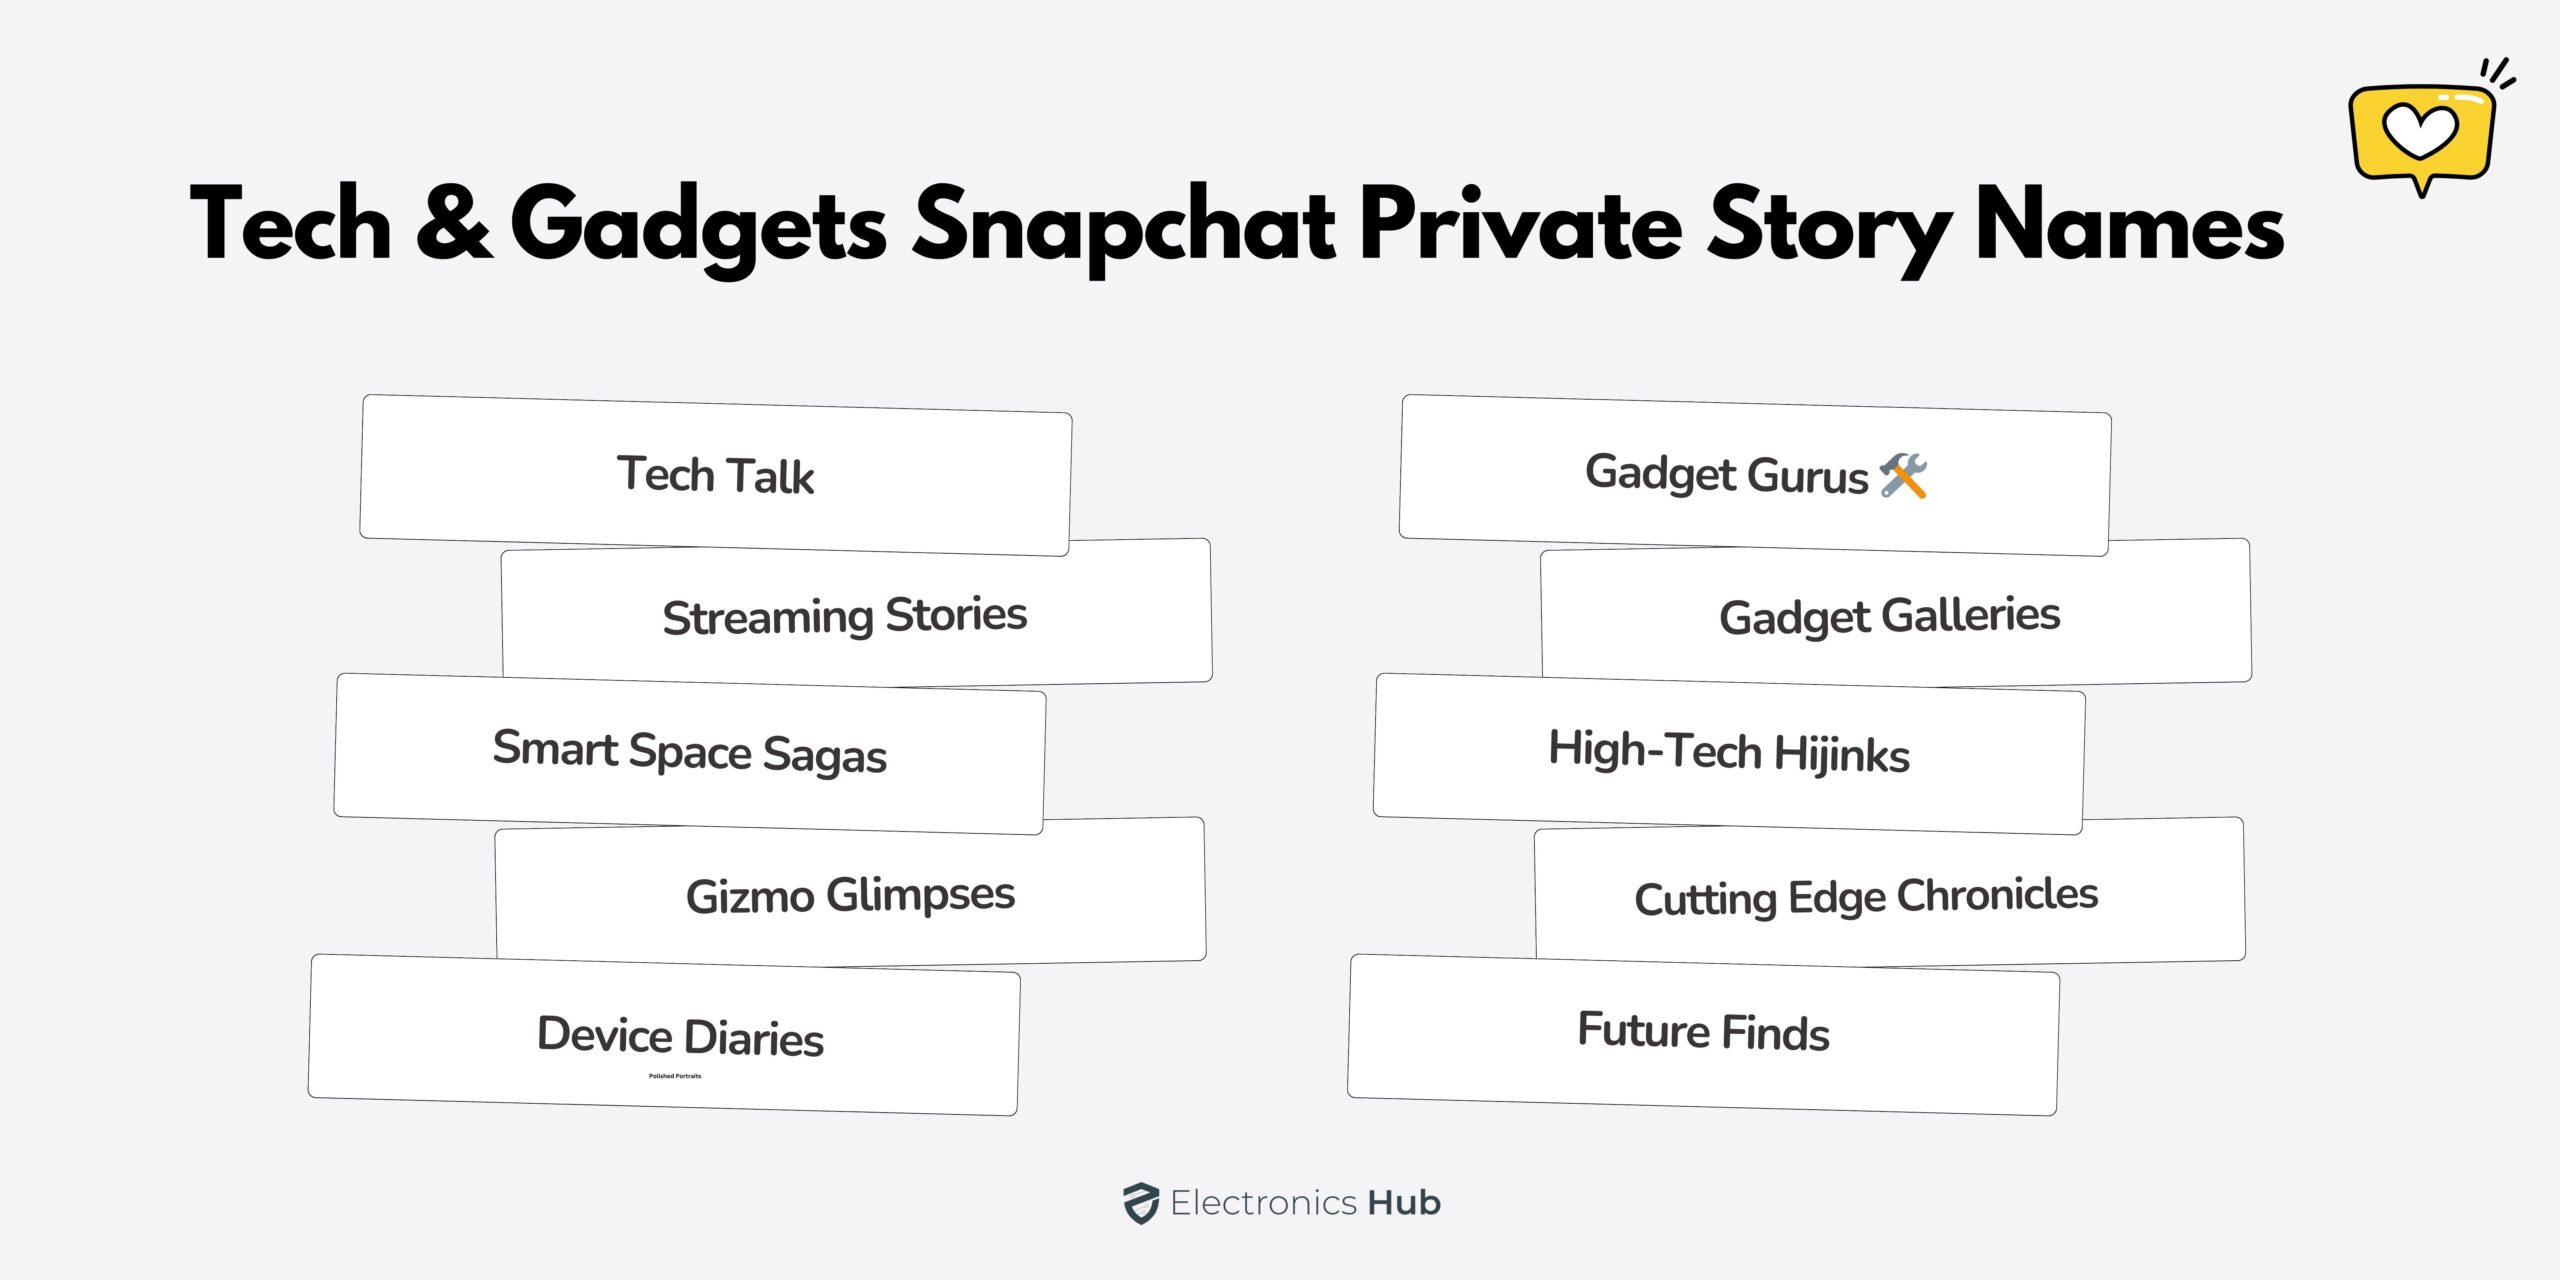 Tech & Gadgets Snapchat Private Story Names